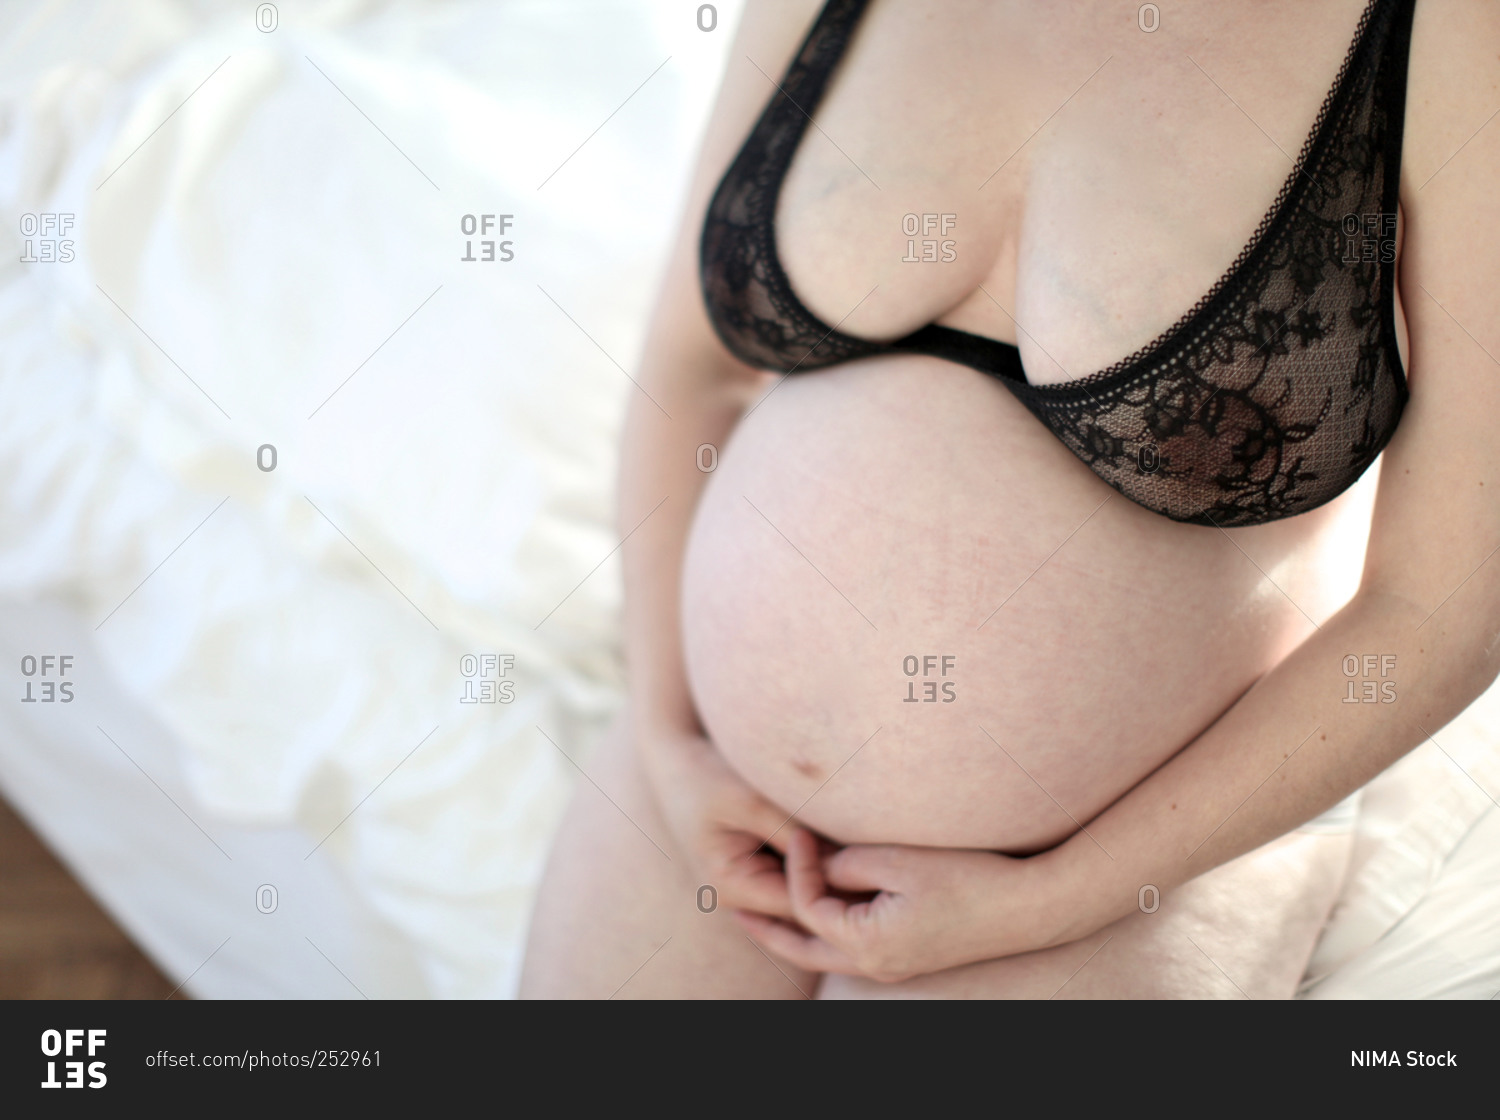 Pregnant woman with black underwear sitting on bed stock photo - OFFSET